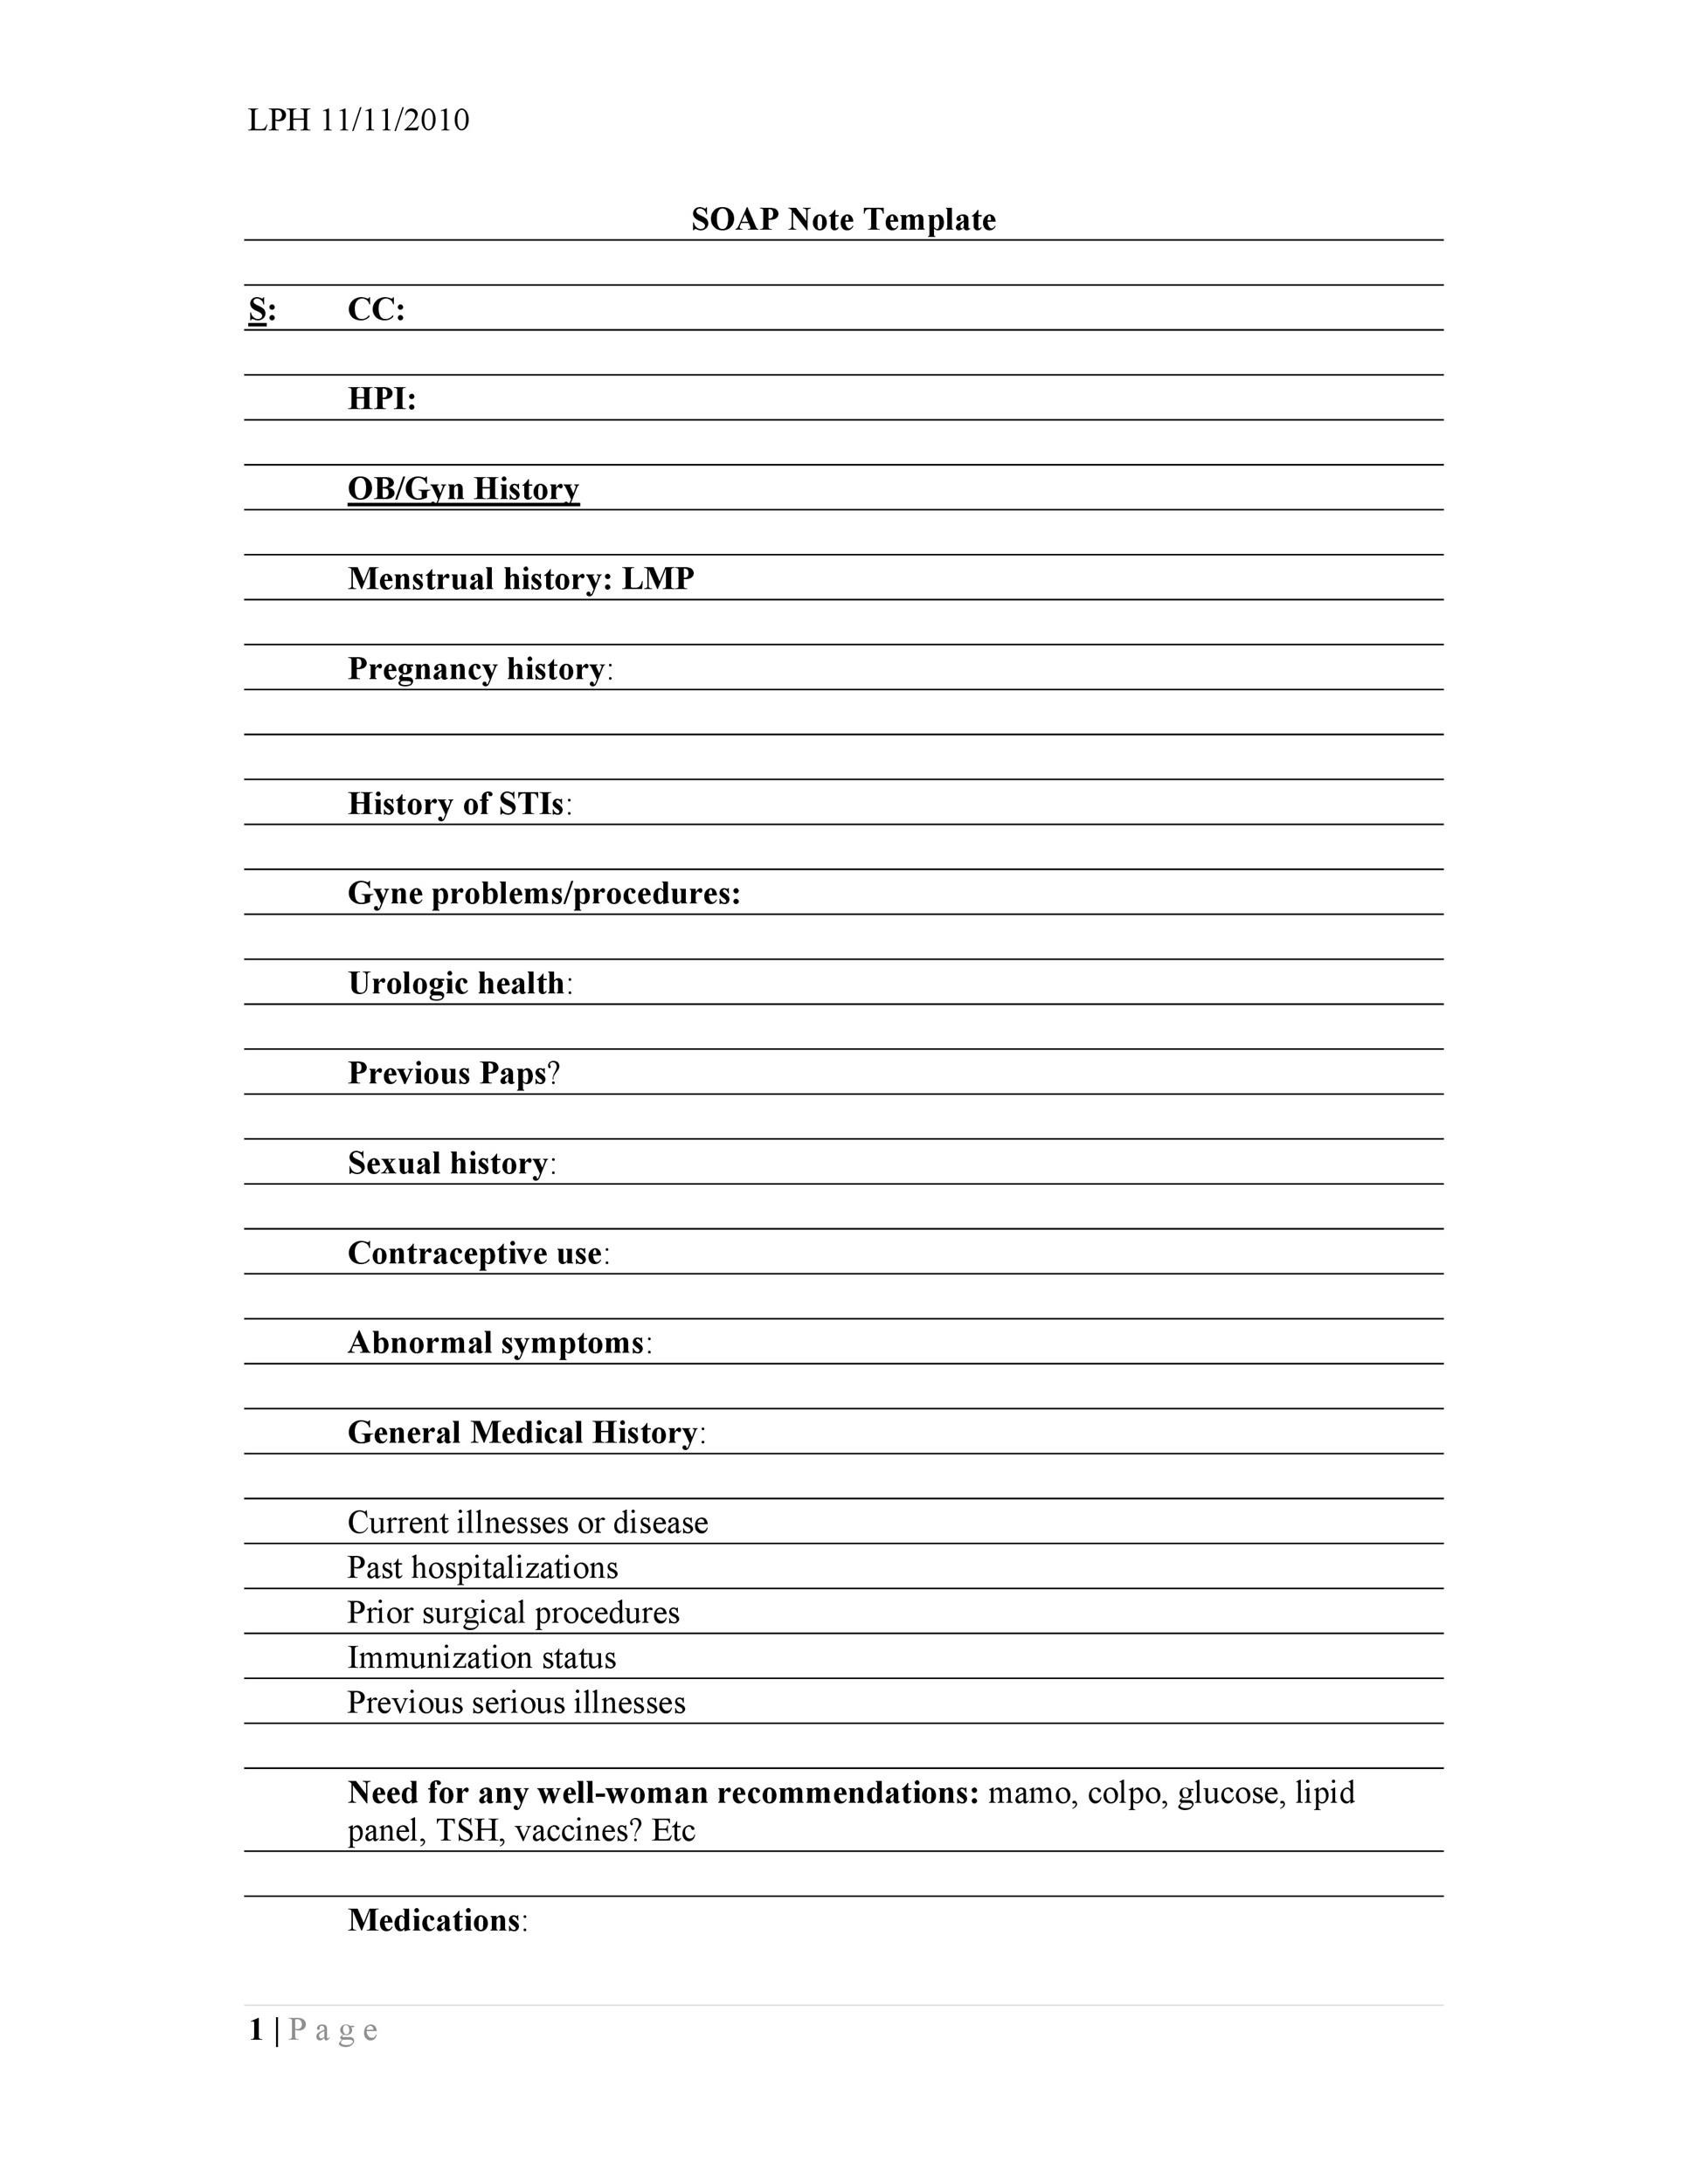 Soap Note Template 12